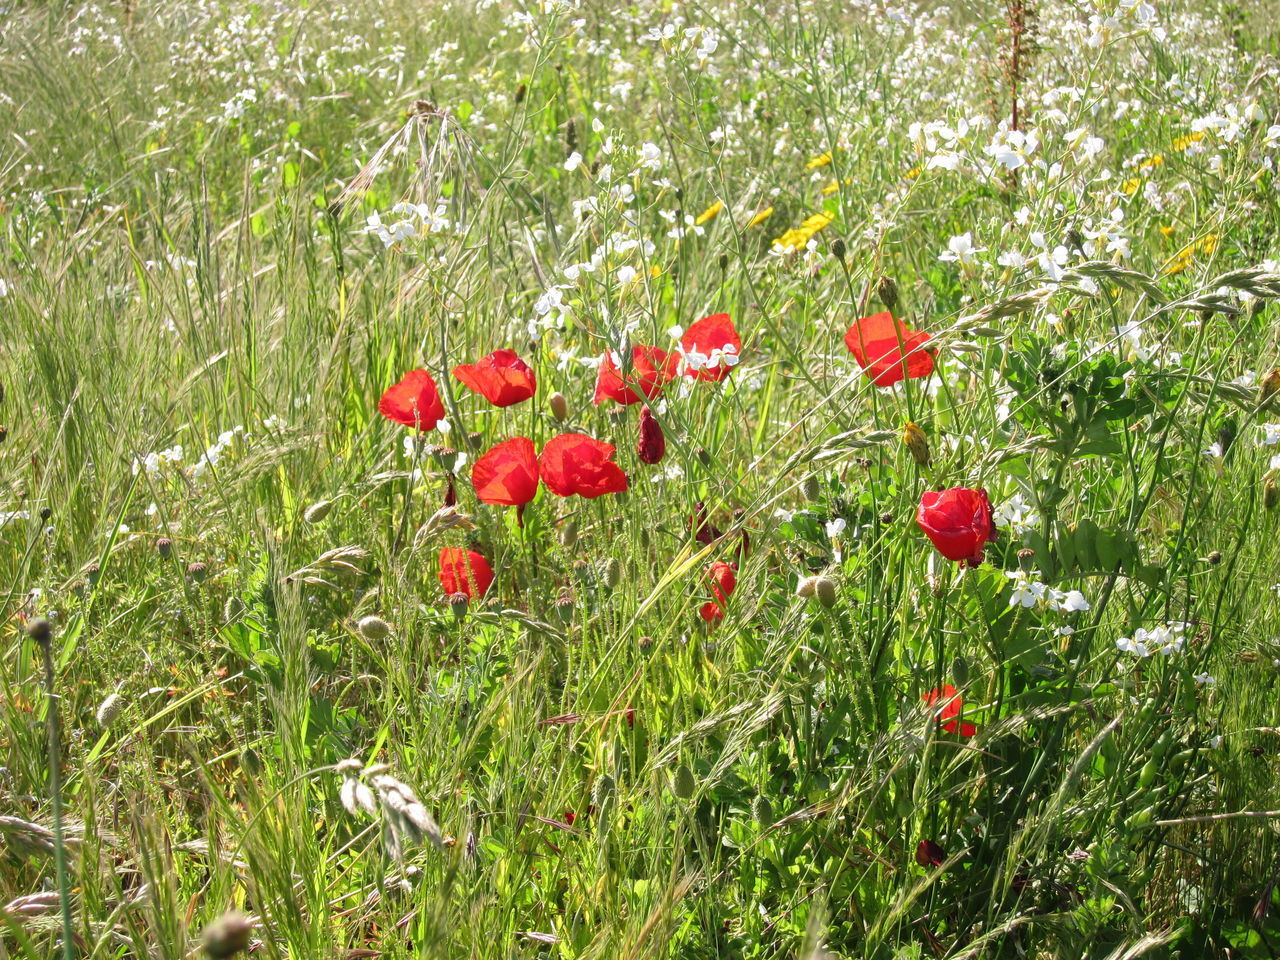 RED POPPIES GROWING IN FIELD